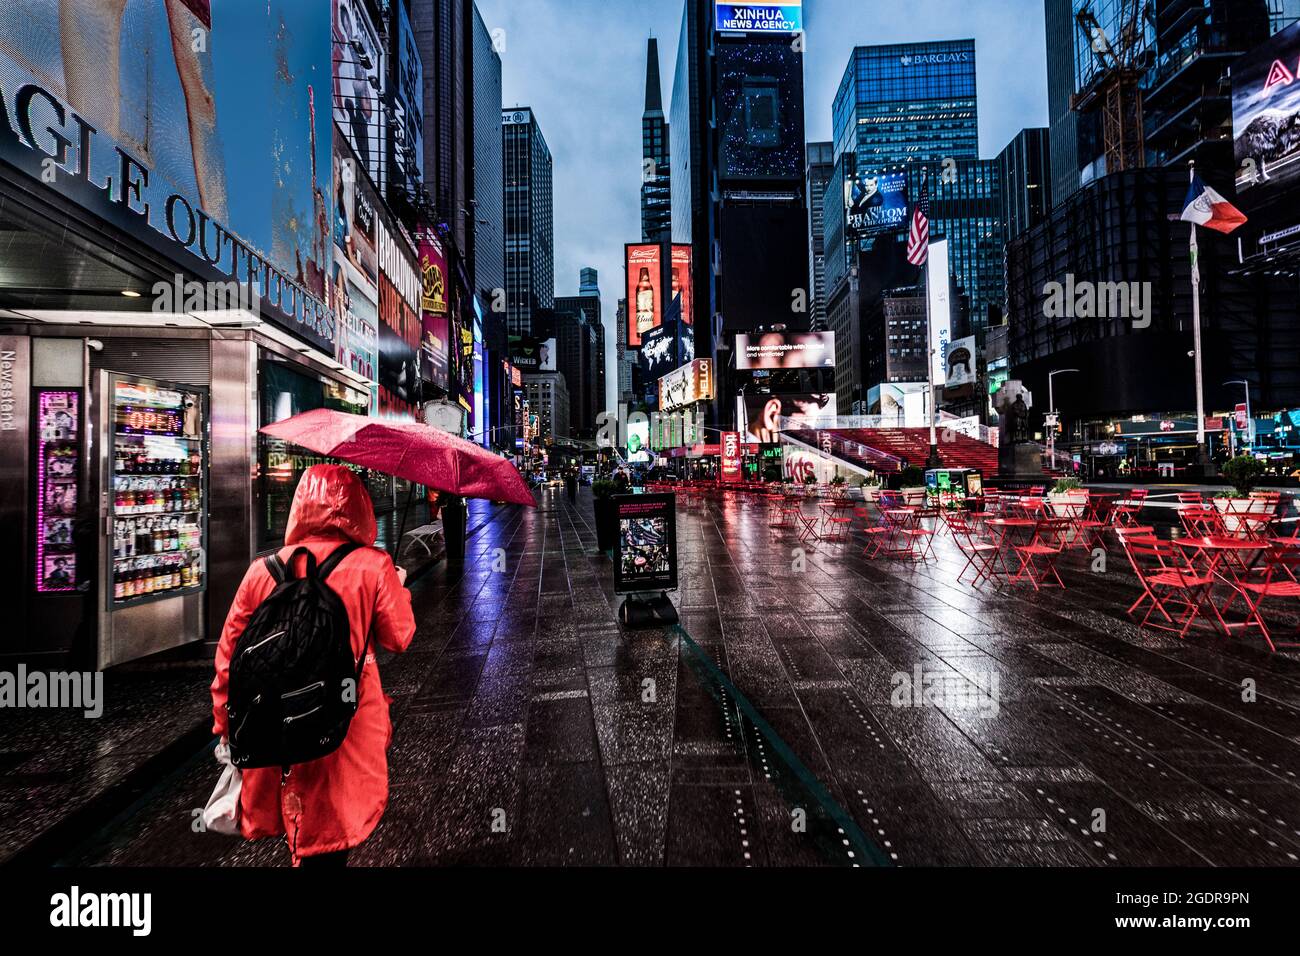 Girl with a red umbrella on a rainy morning in Times Square, New York City, USA. Stock Photo